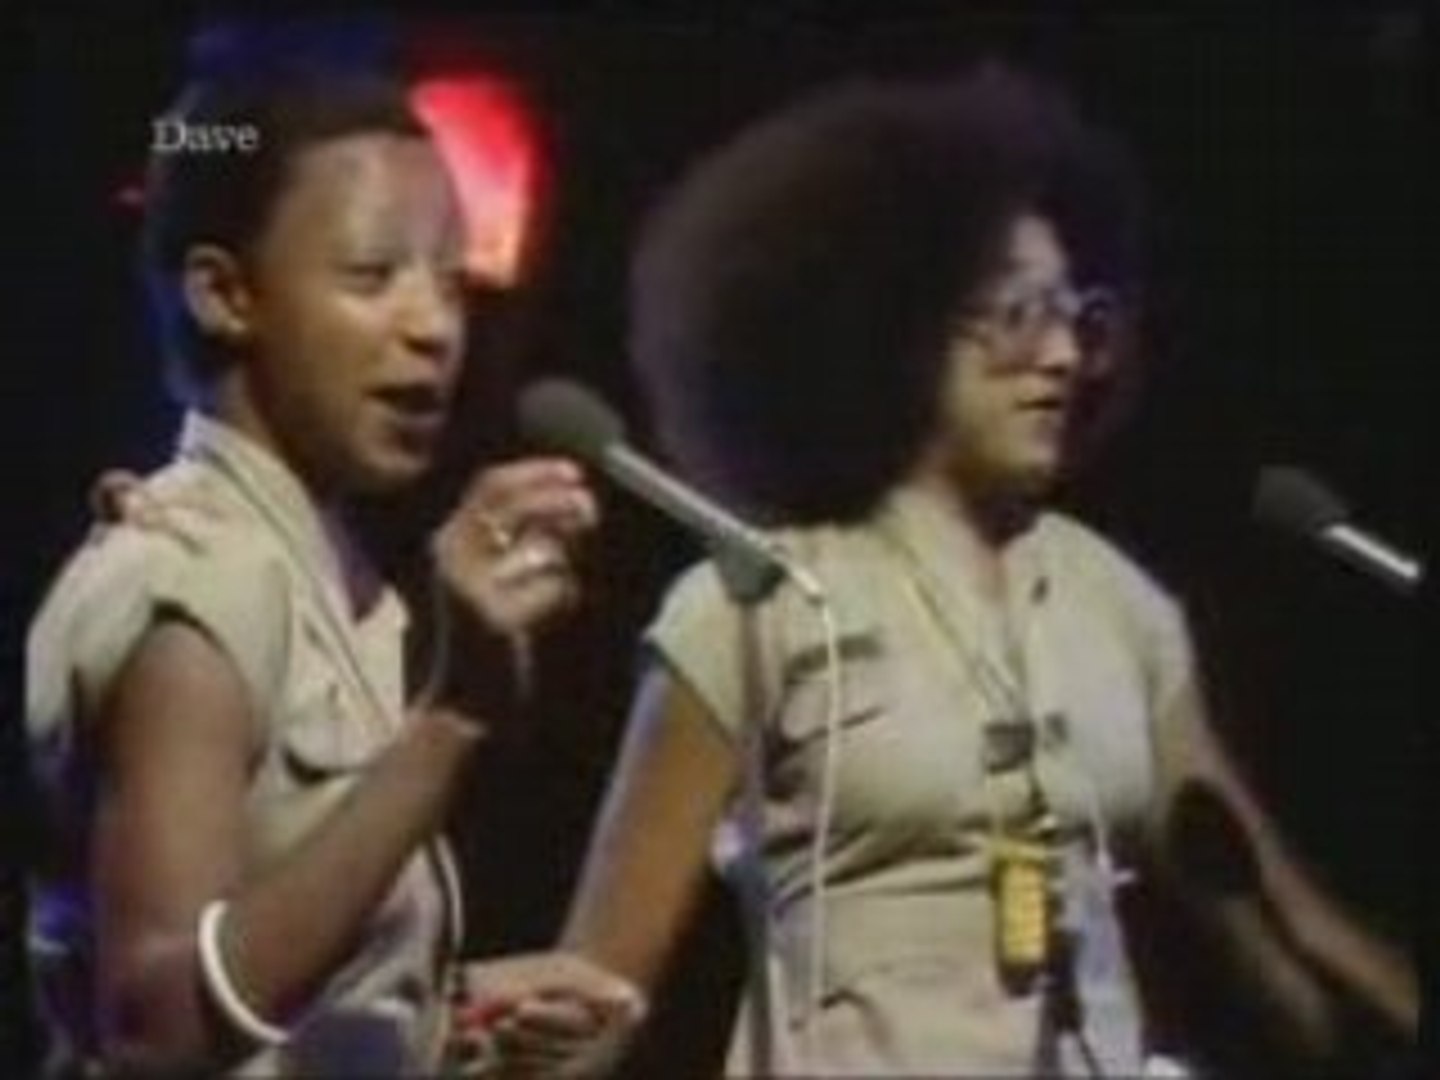 Althea & Donna - 'Uptown top rankin' (live)' - video Dailymotion